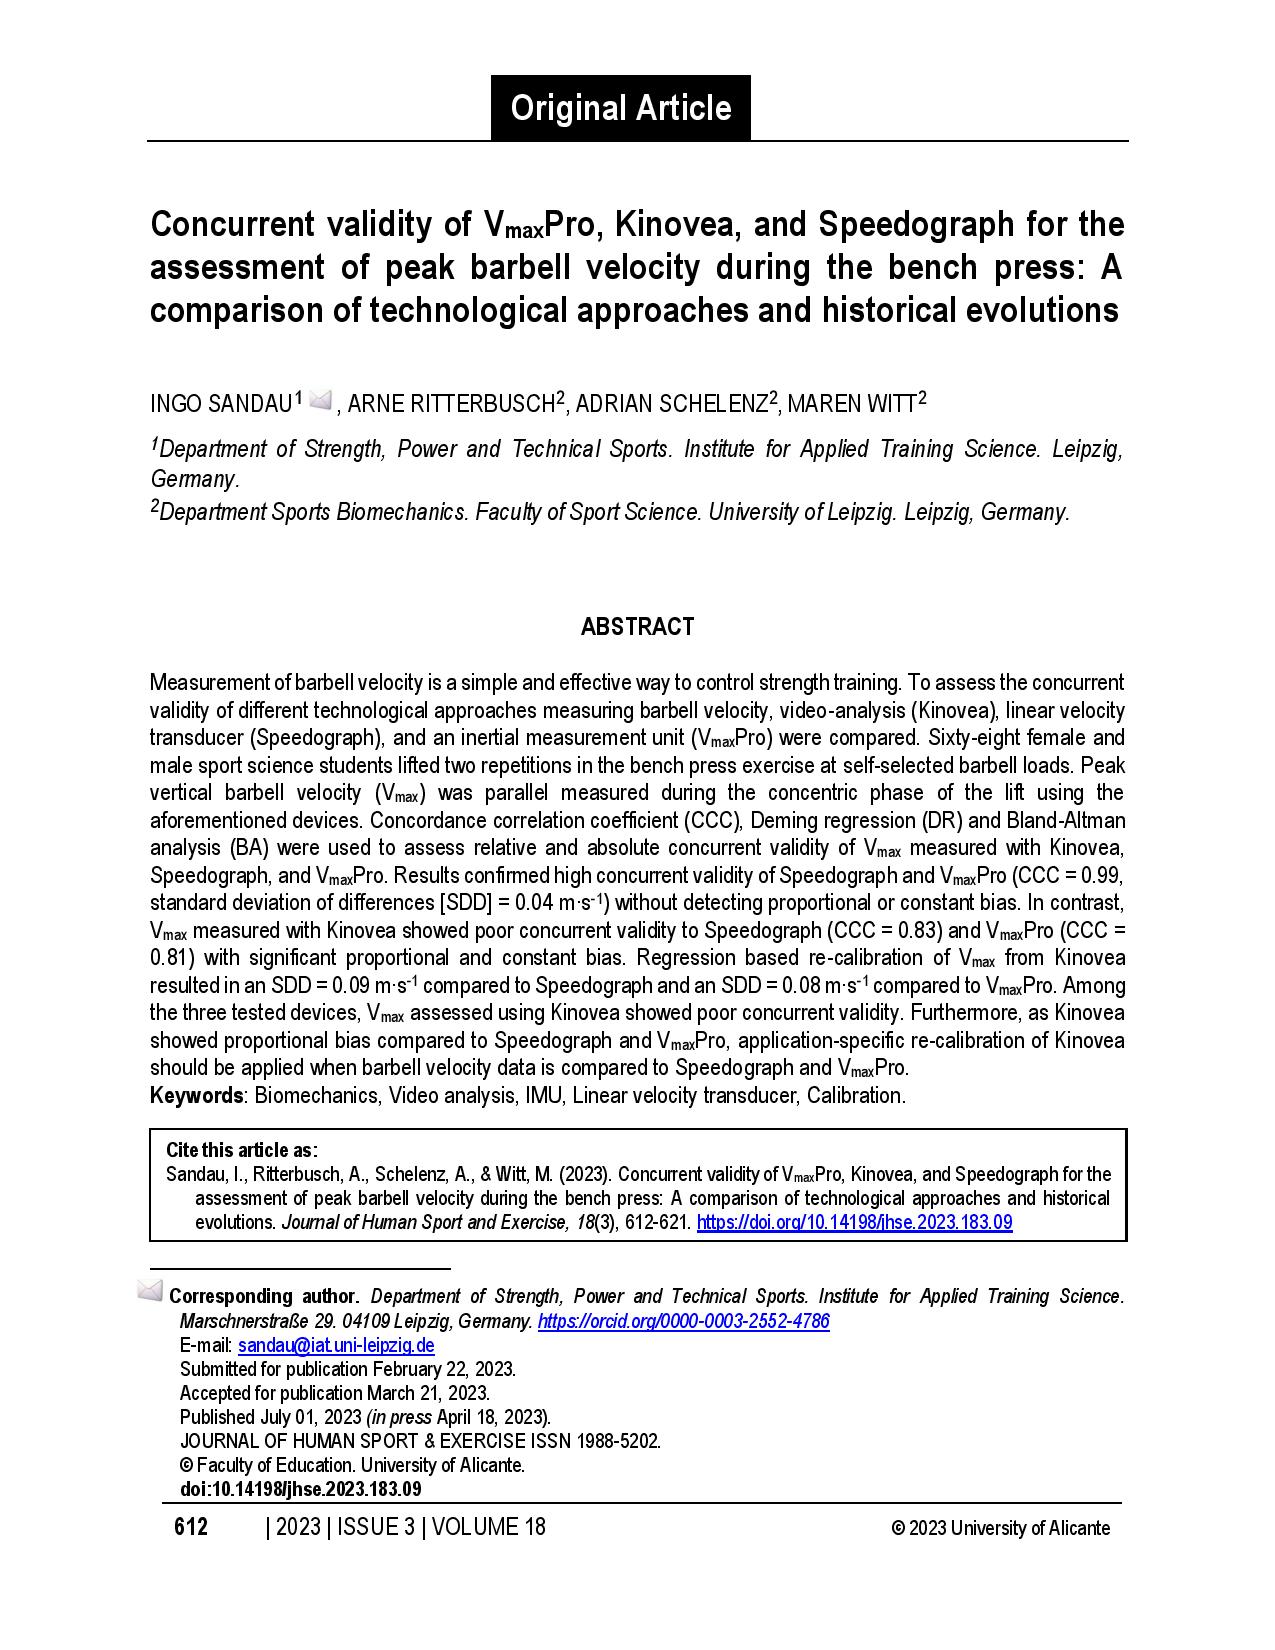 Concurrent validity of VmaxPro, Kinovea, and Speedograph for the assessment of peak barbell velocity during the bench press: A comparison of technological approaches and historical evolutions